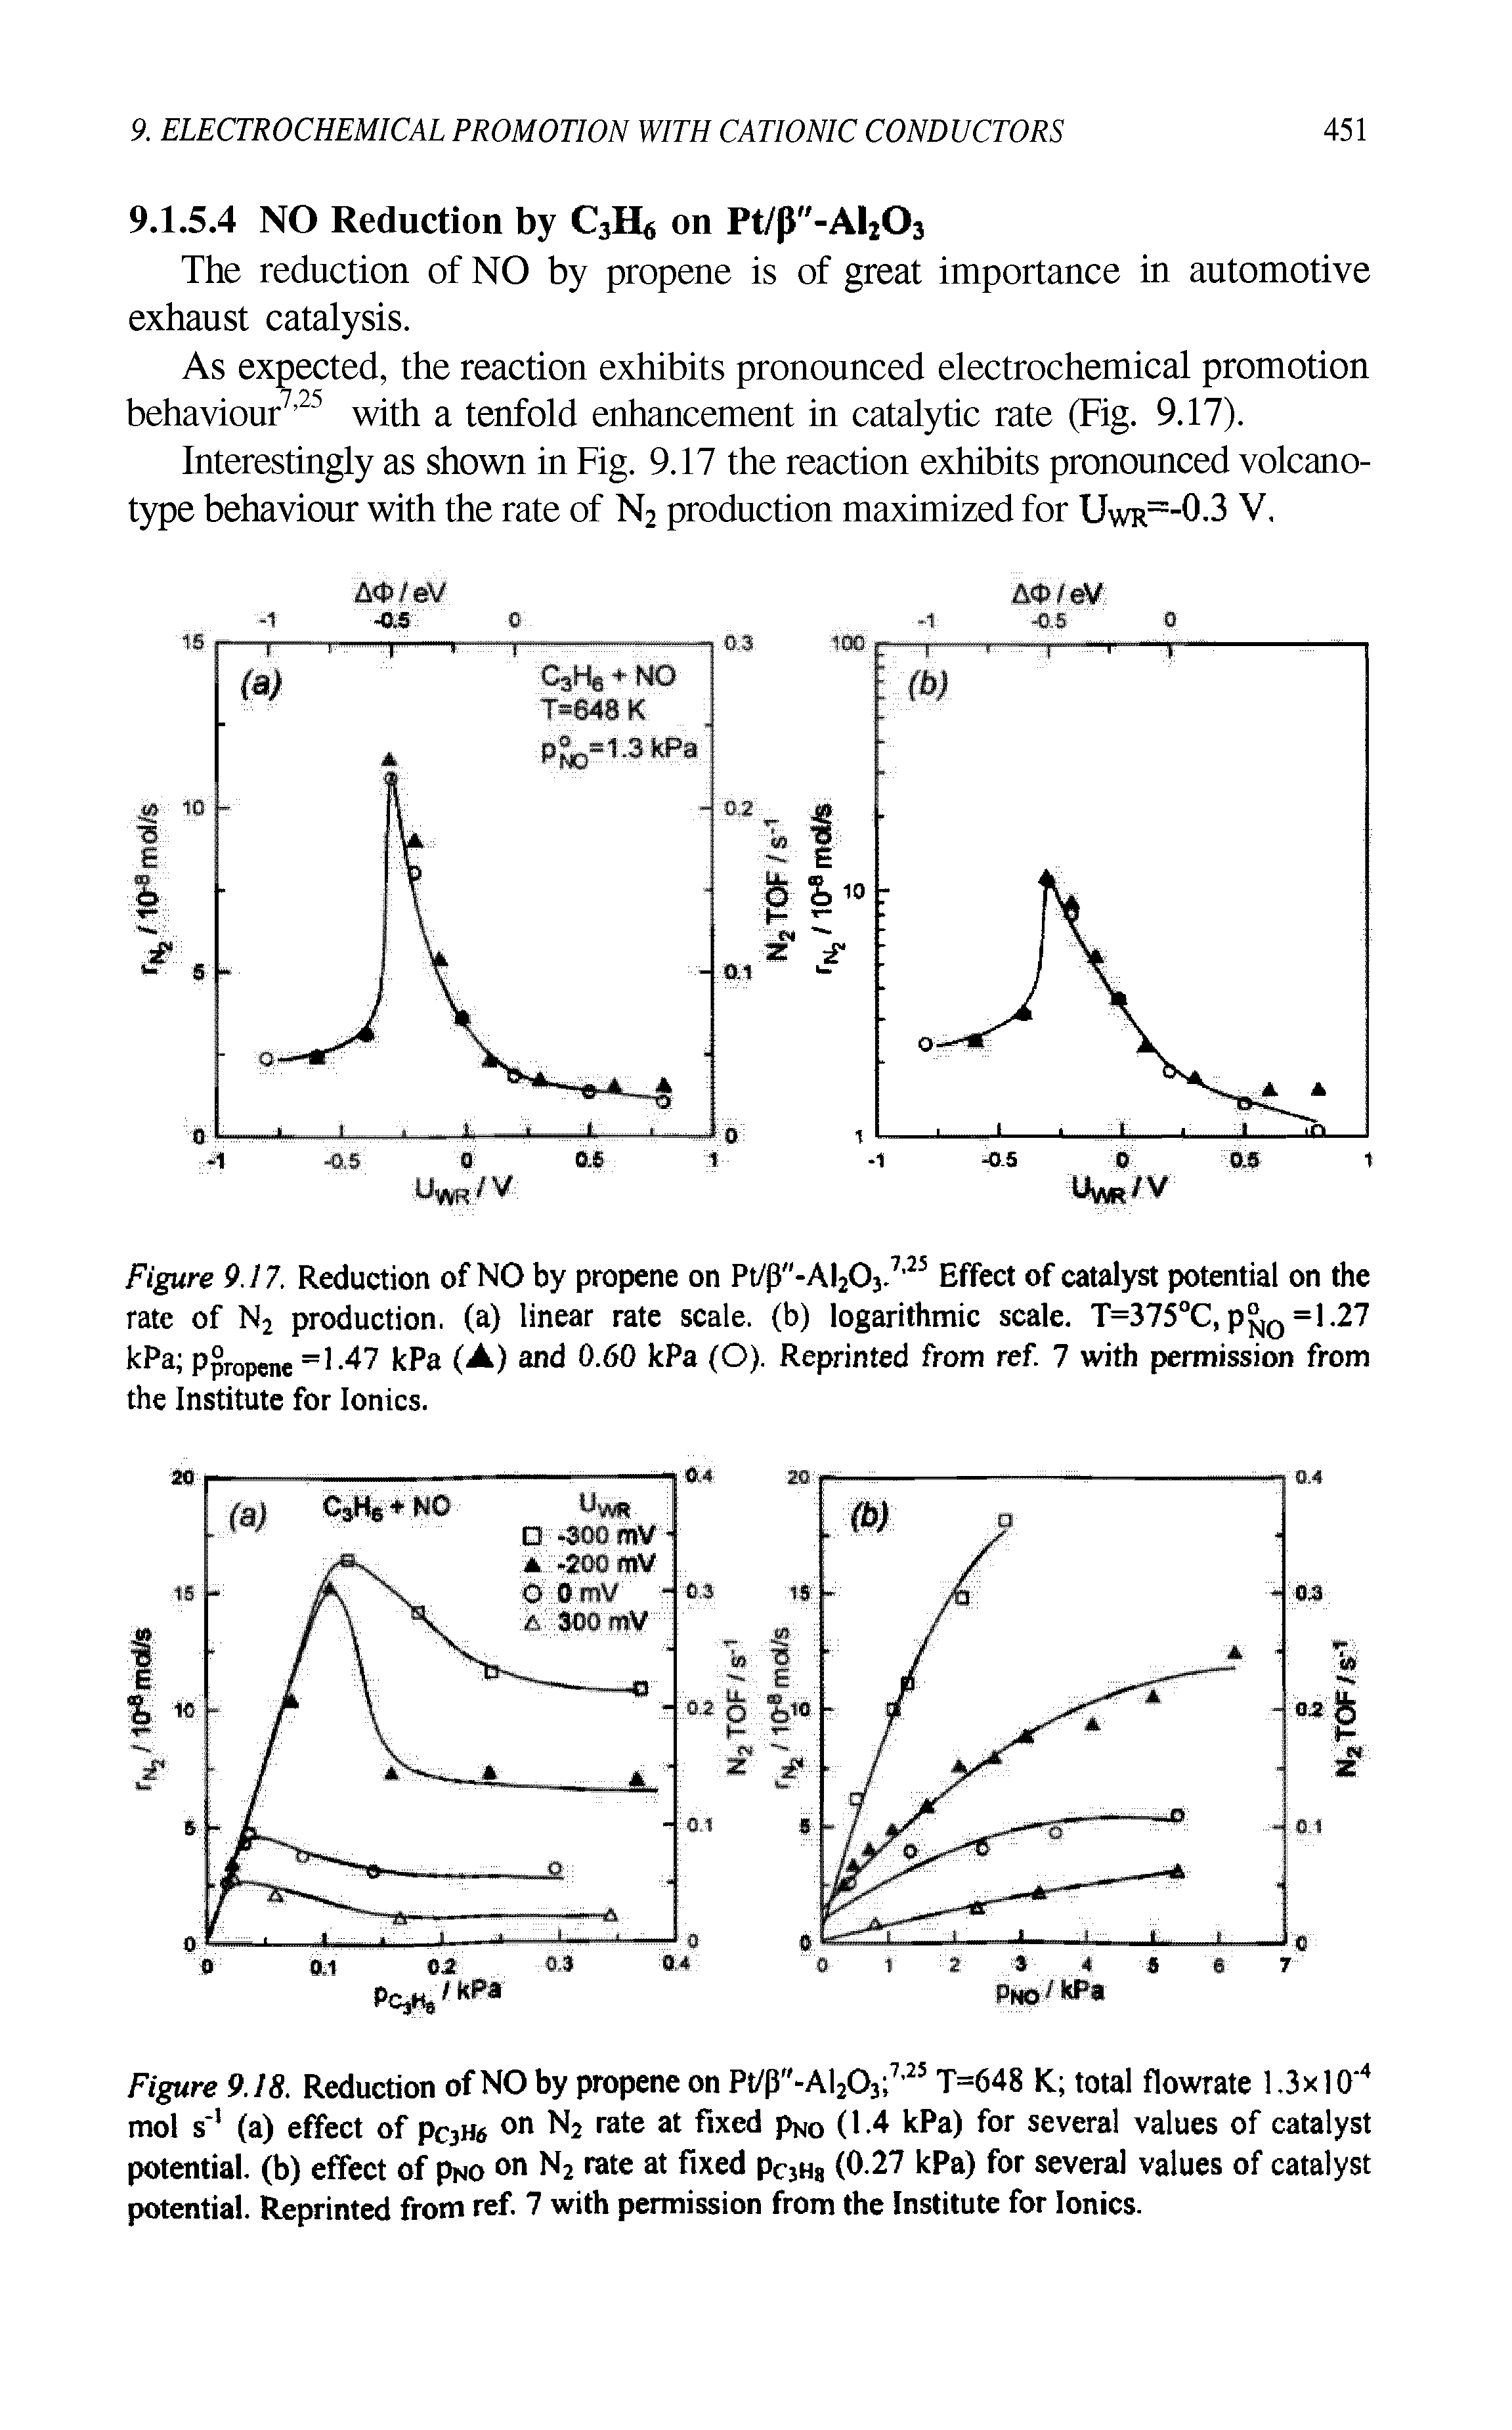 Figure 9.17. Reduction of NO by propene on Pt/p -AI203.7,25 Effect of catalyst potential on the rate of N2 production, (a) linear rate scale, (b) logarithmic scale. T=375°C, p ,0 =1.27 kPa ppropene =1-47 kPa (A) and 0.60 kPa (O). Reprinted from ref. 7 with permission from the Institute for Ionics.